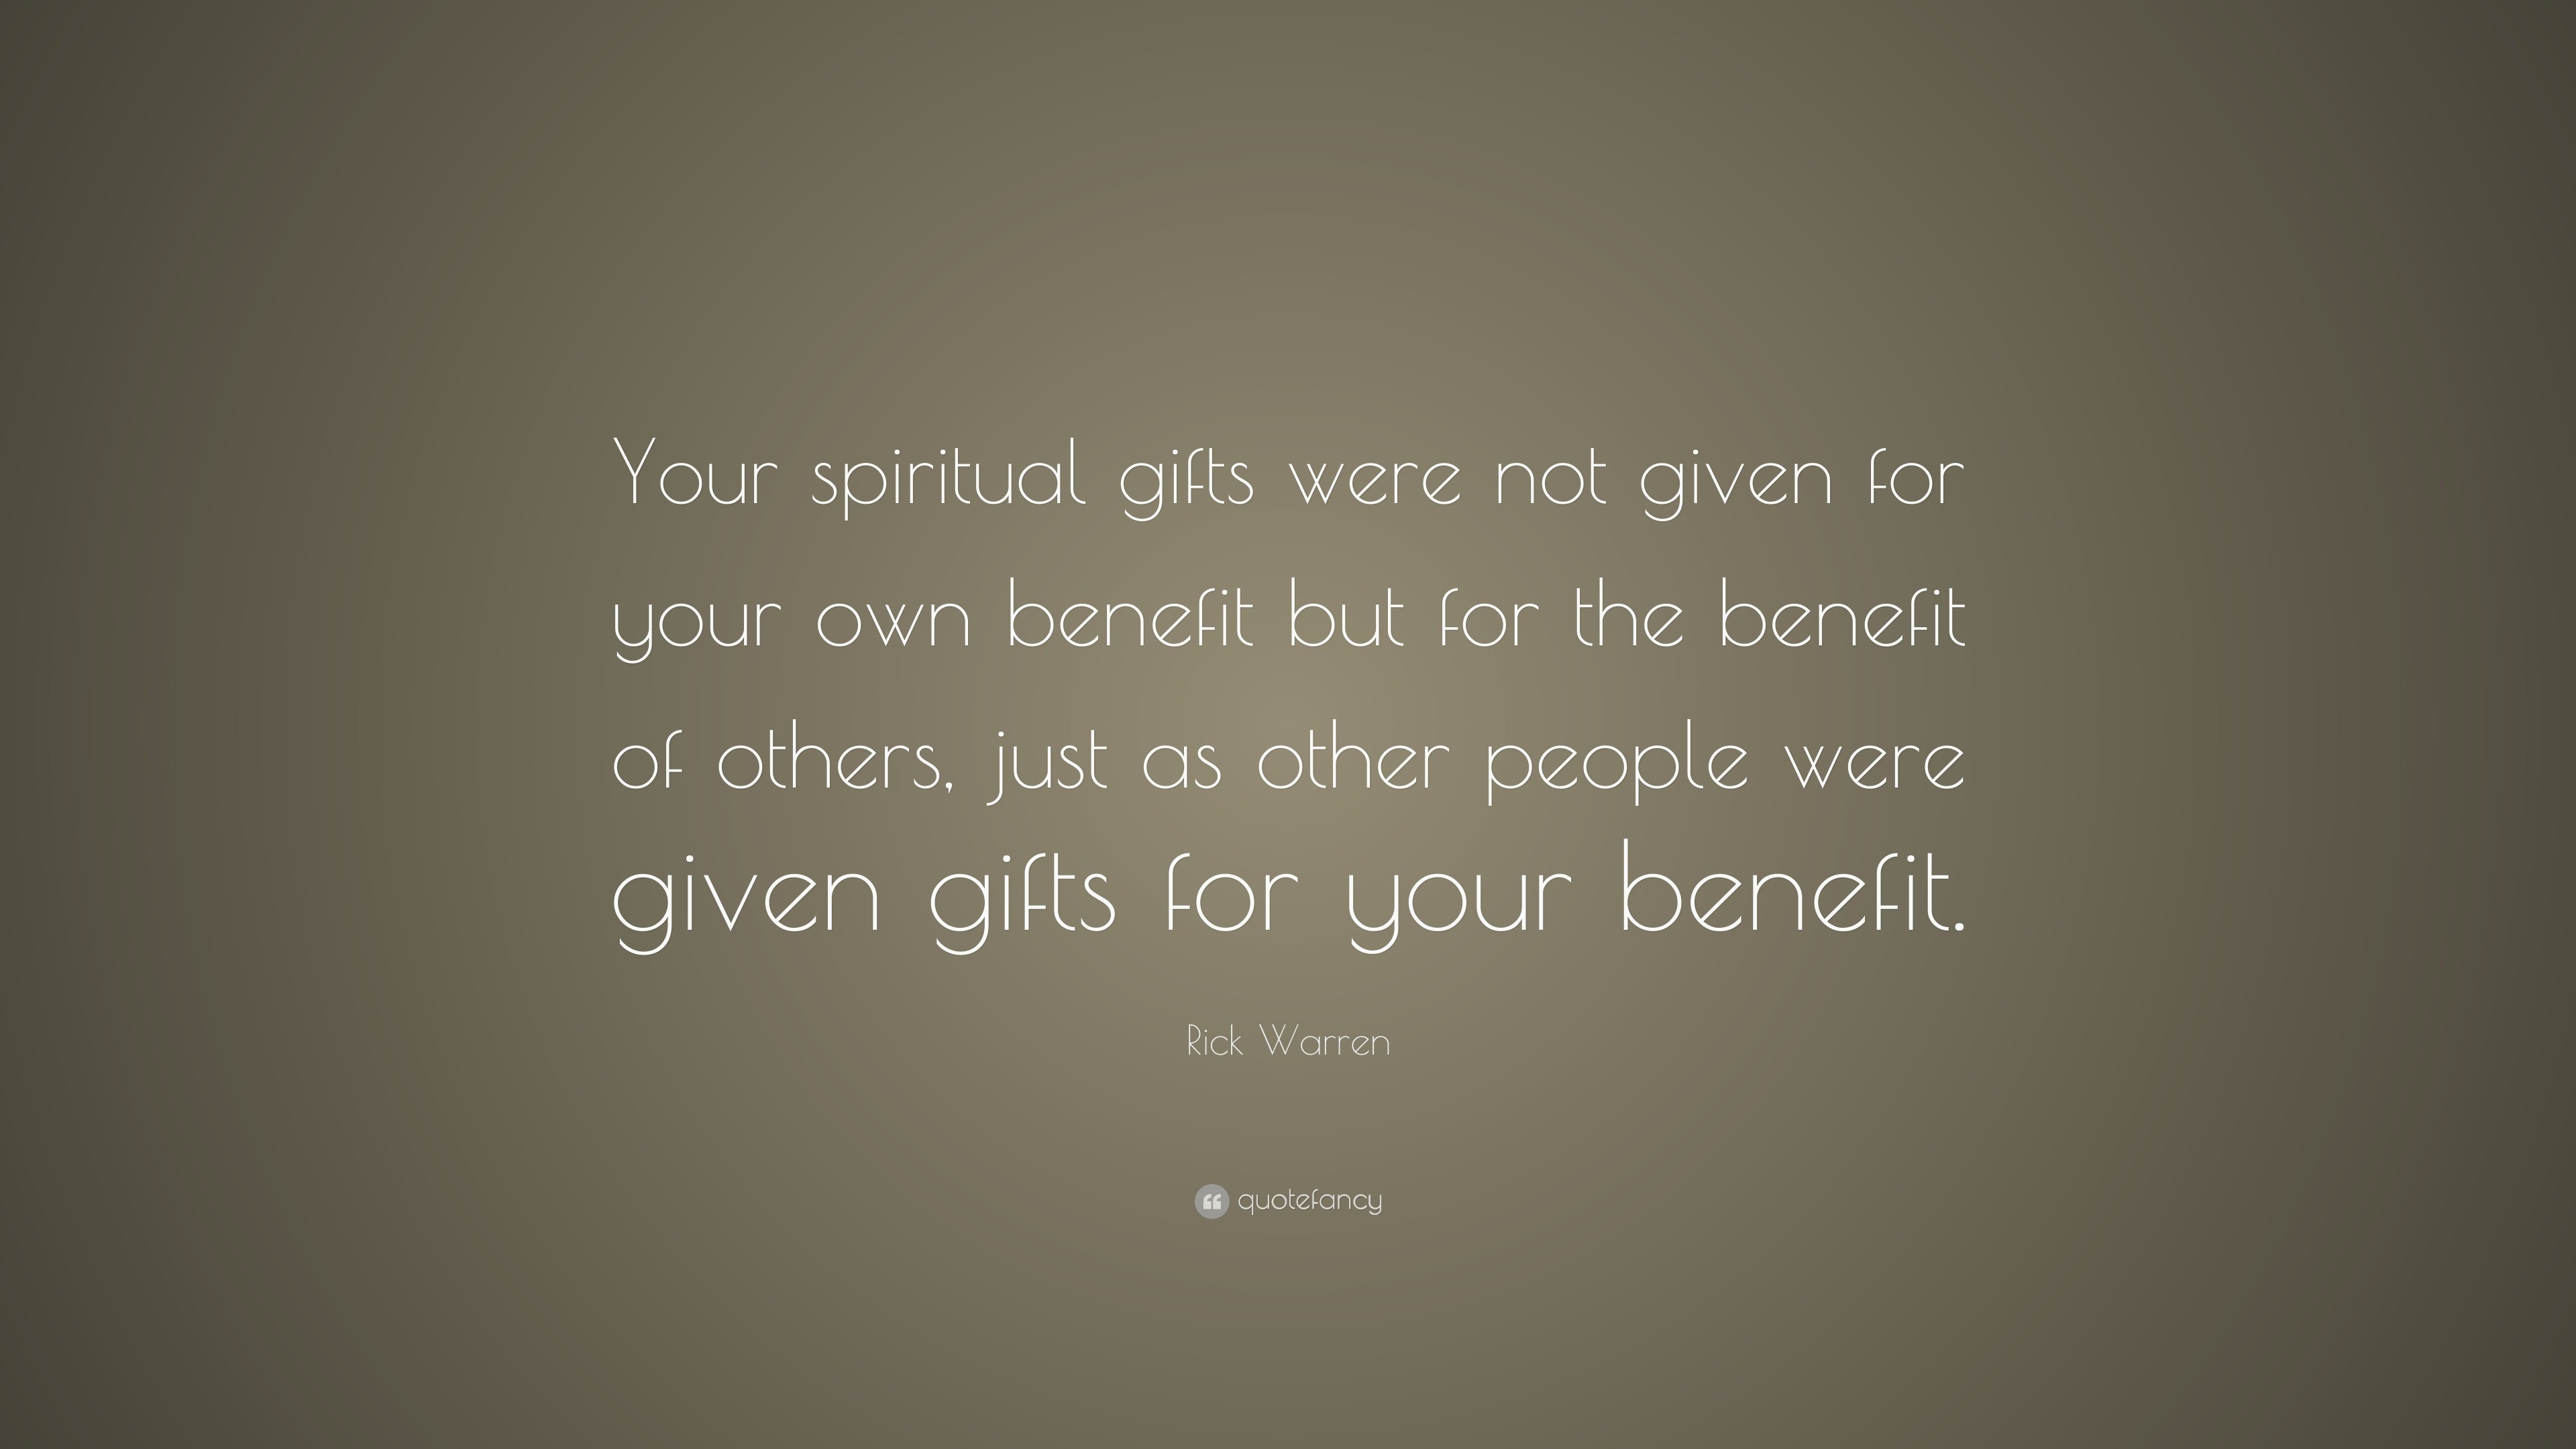 Rick Warren Quote: “Your Spiritual Gifts Were Not Given For Your Own Benefit But For The Benefit Of Others, Just As Other People Were Given ...”